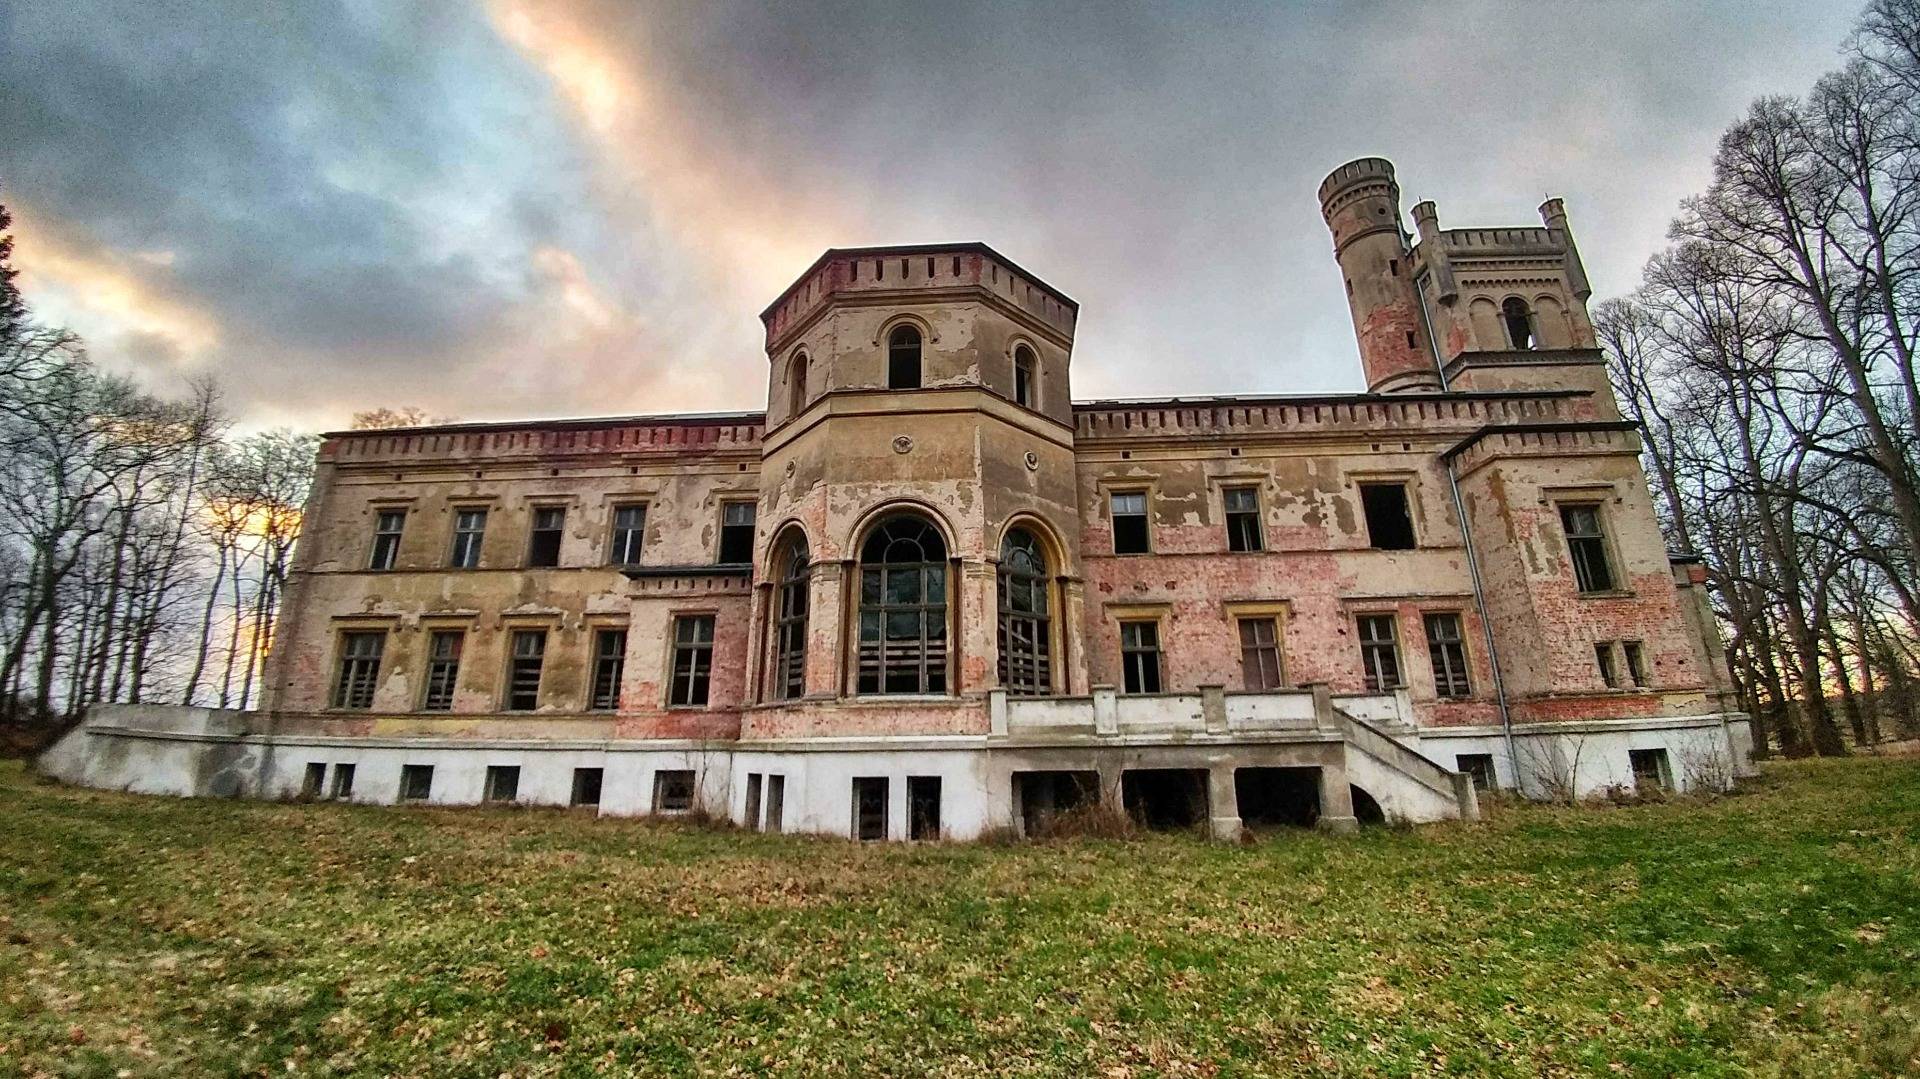 Lost place: The deadly palace of Dreżewo